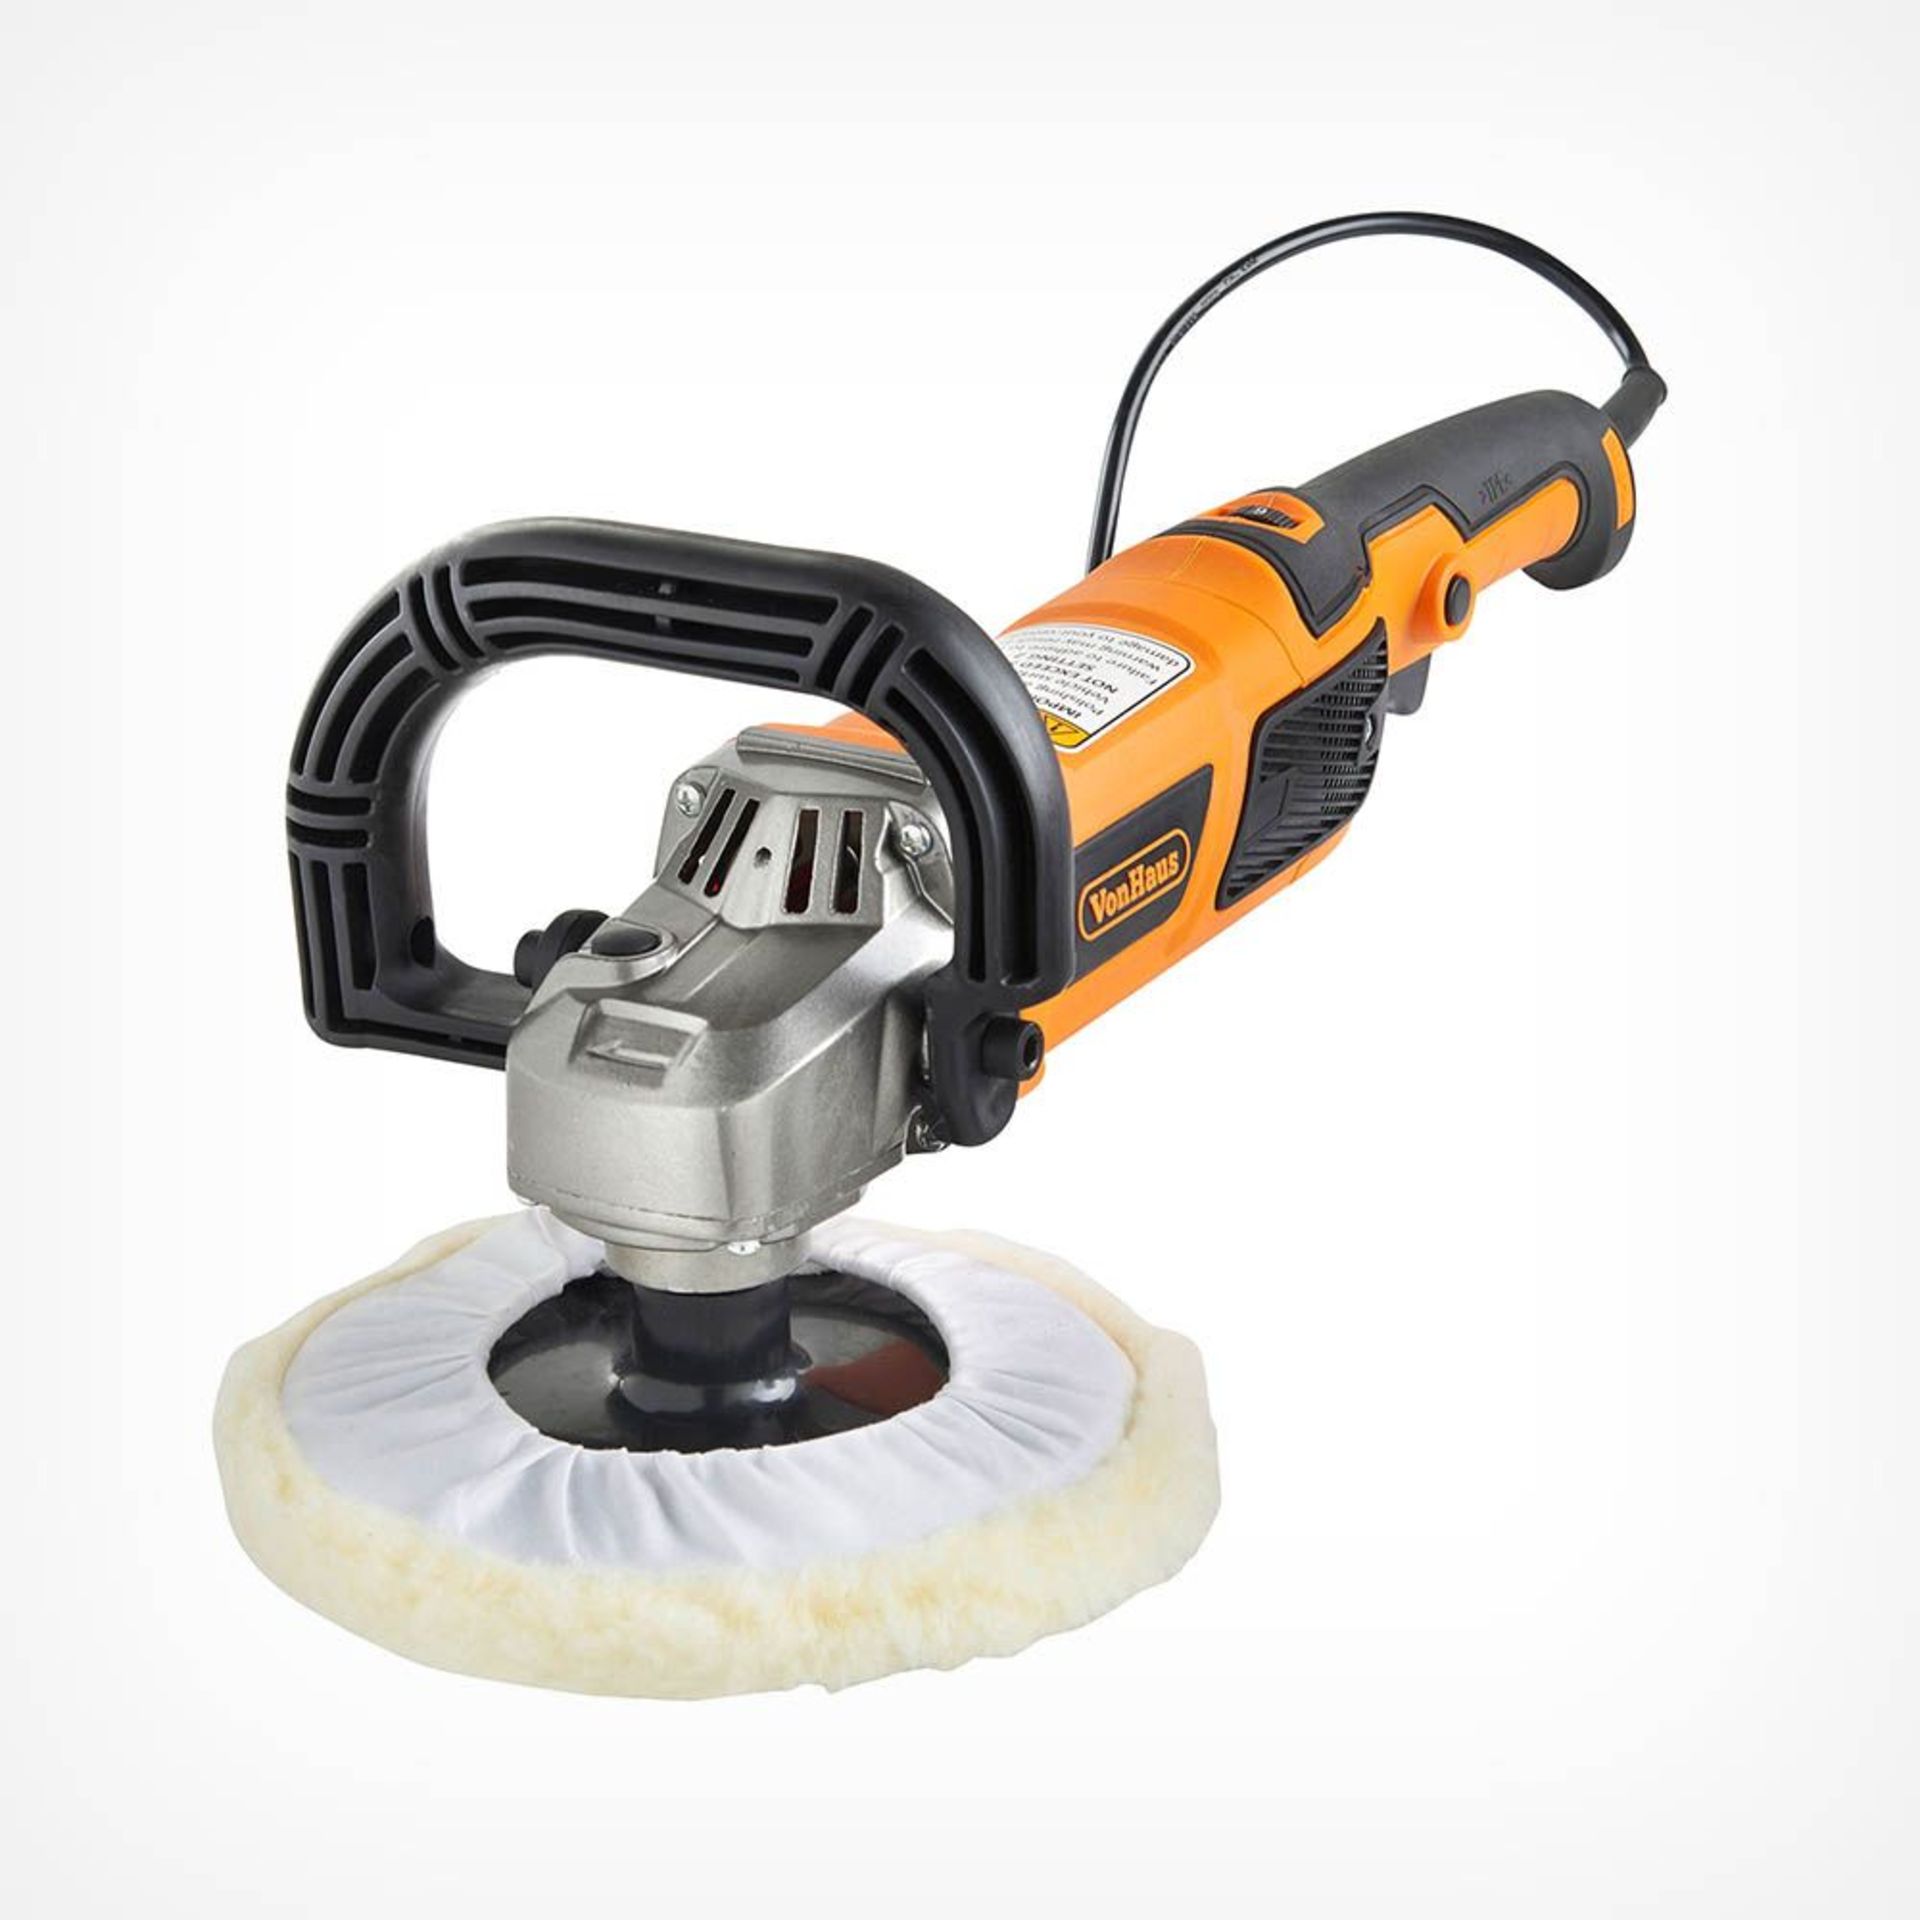 Polisher & Sander 1200W. - BI. If you love spending time keeping your beloved possessions buffed